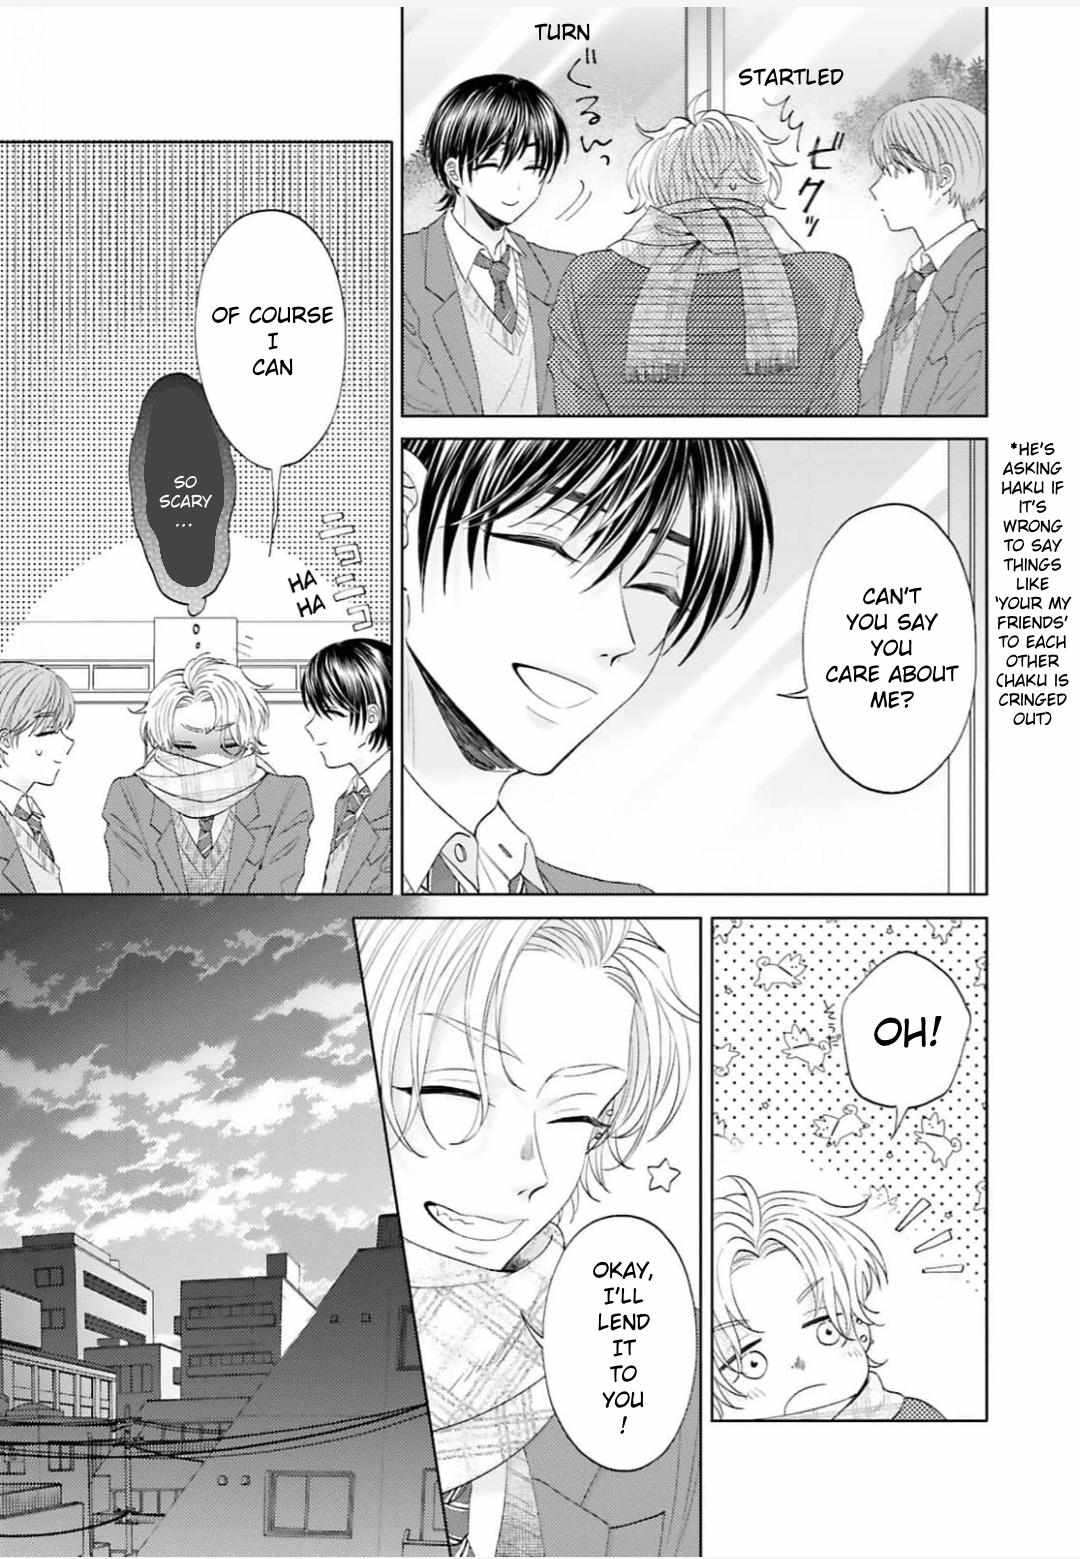 My Cutie Pie -An Ordinary Boy And His Gorgeous Childhood Friend- 〘Official〙 - 10 page 5-24c31754